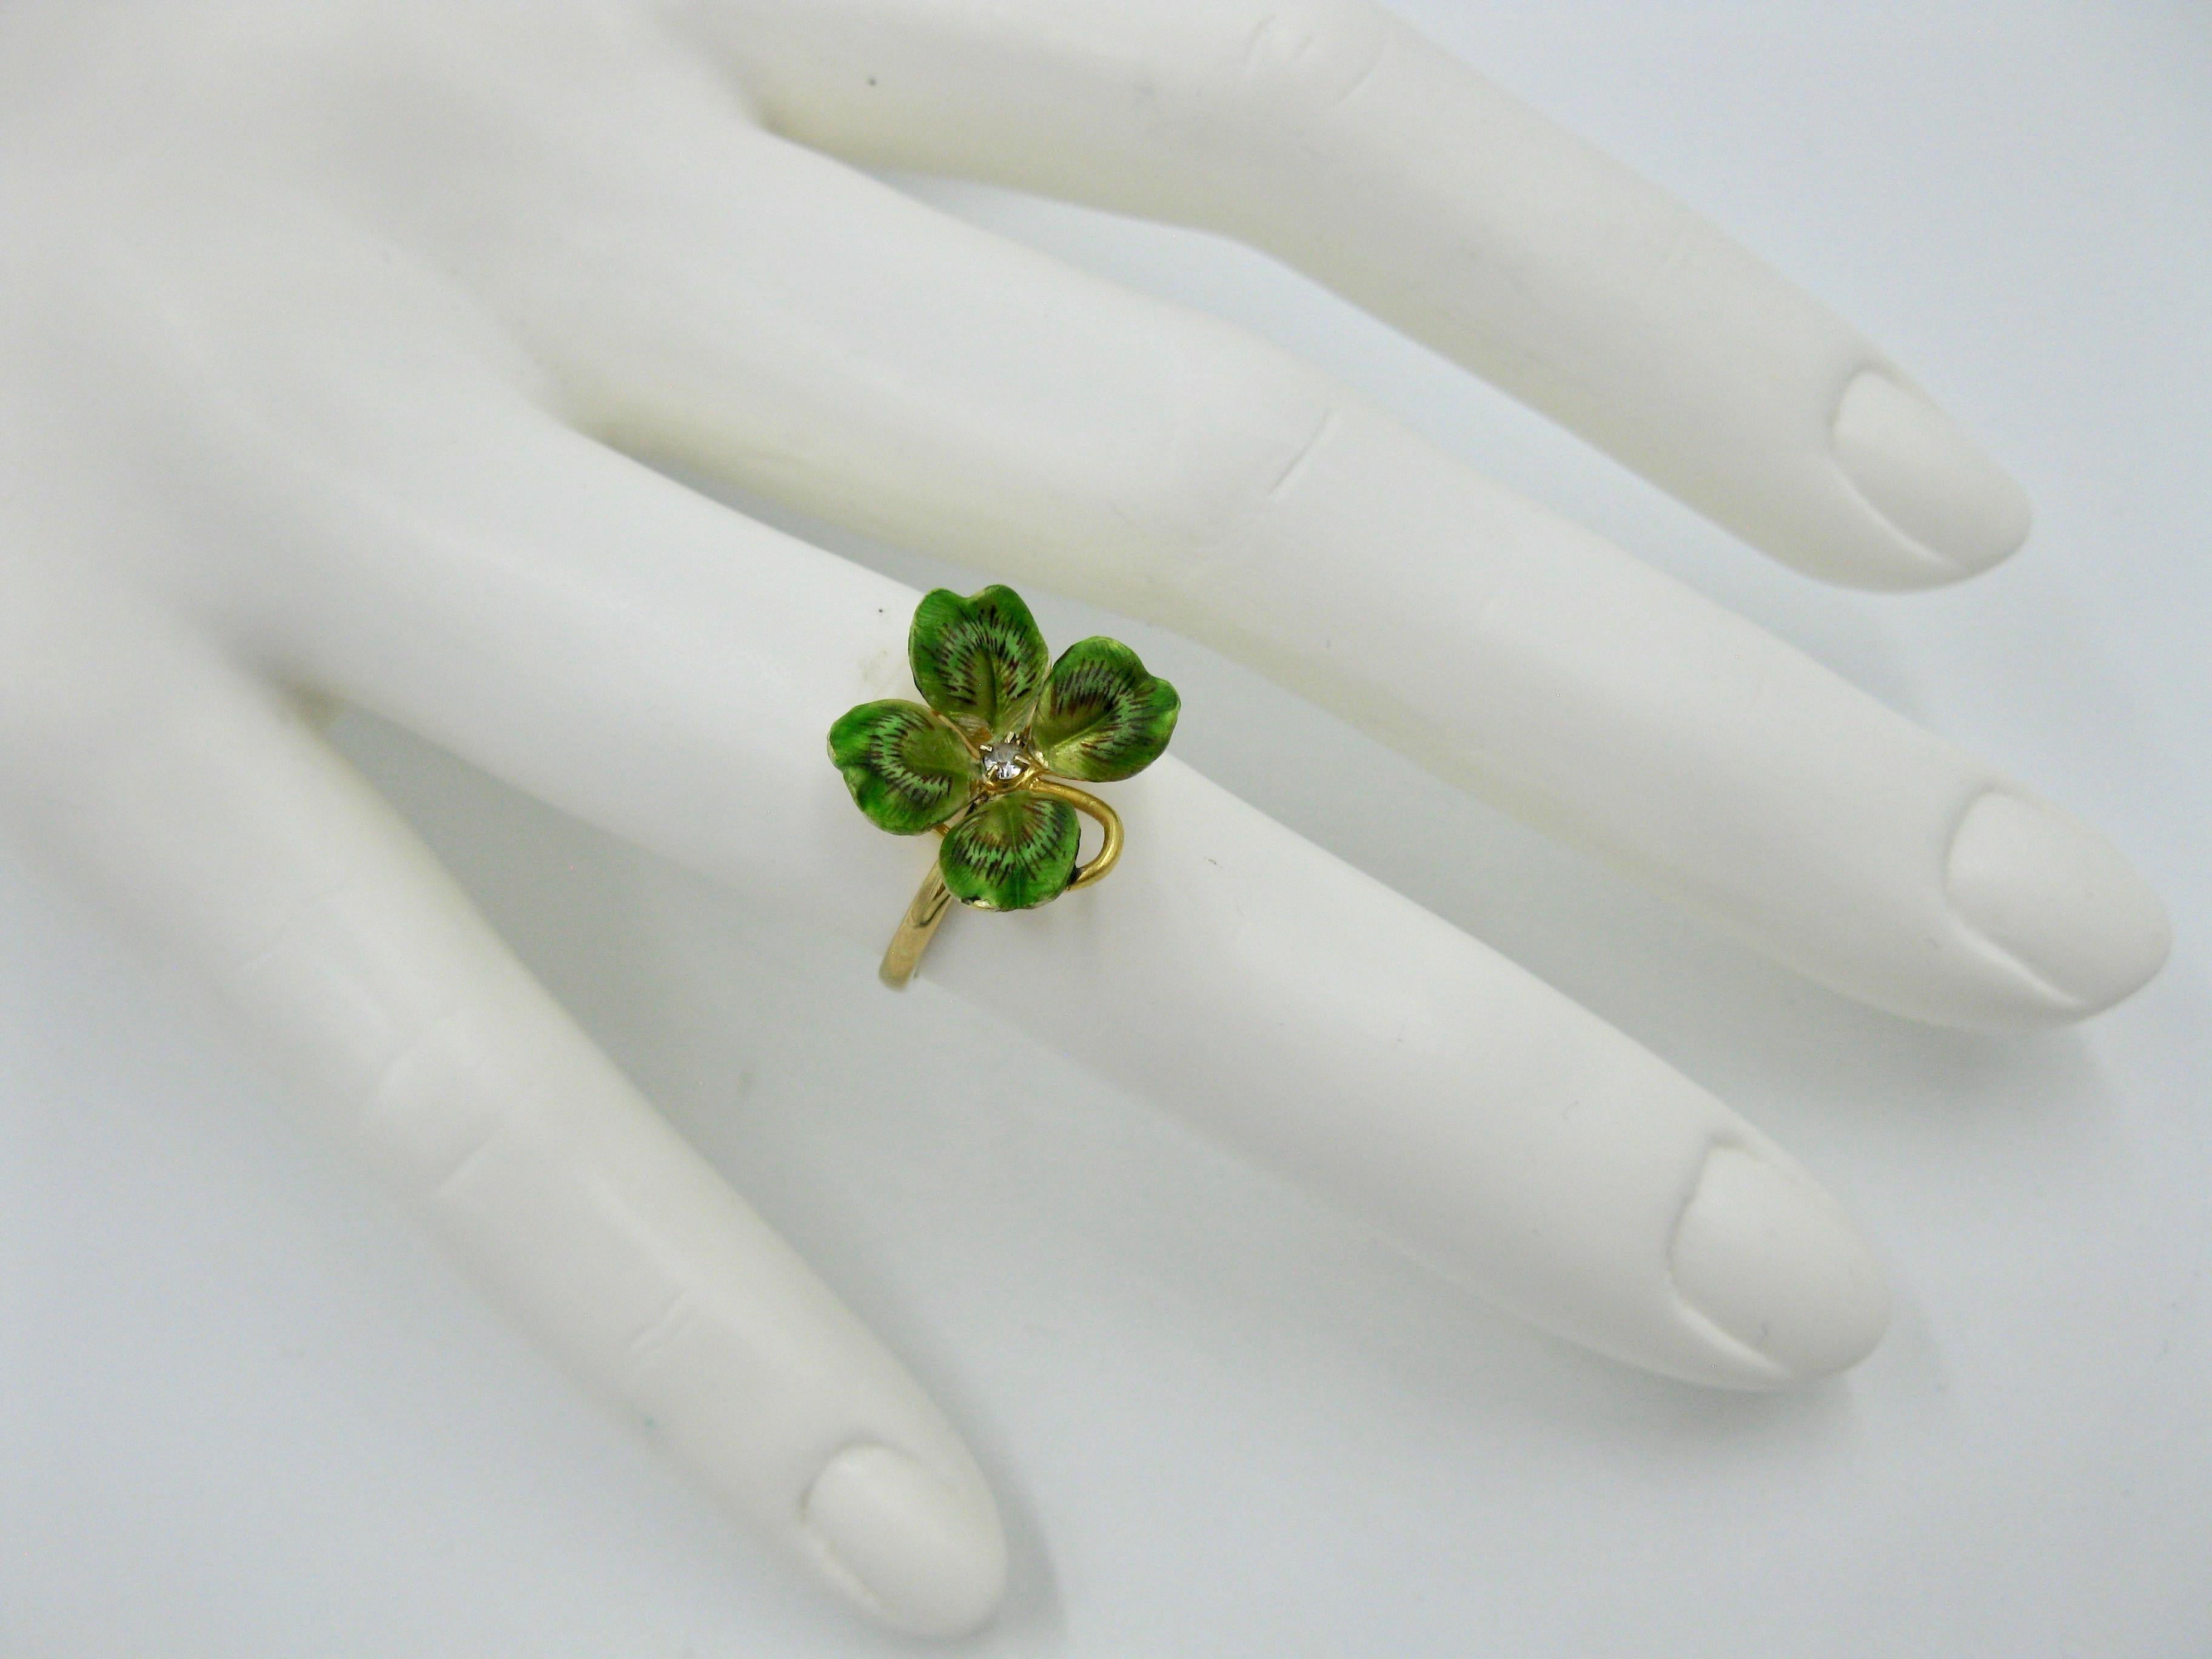 A very special Victorian - Edwardian Ring in the form of a four leaf clover or shamrock.  The beautiful flower is done with exquisite enamel work in various shades of green with black highlights.  In the center of the leaves is a diamond.  The gold